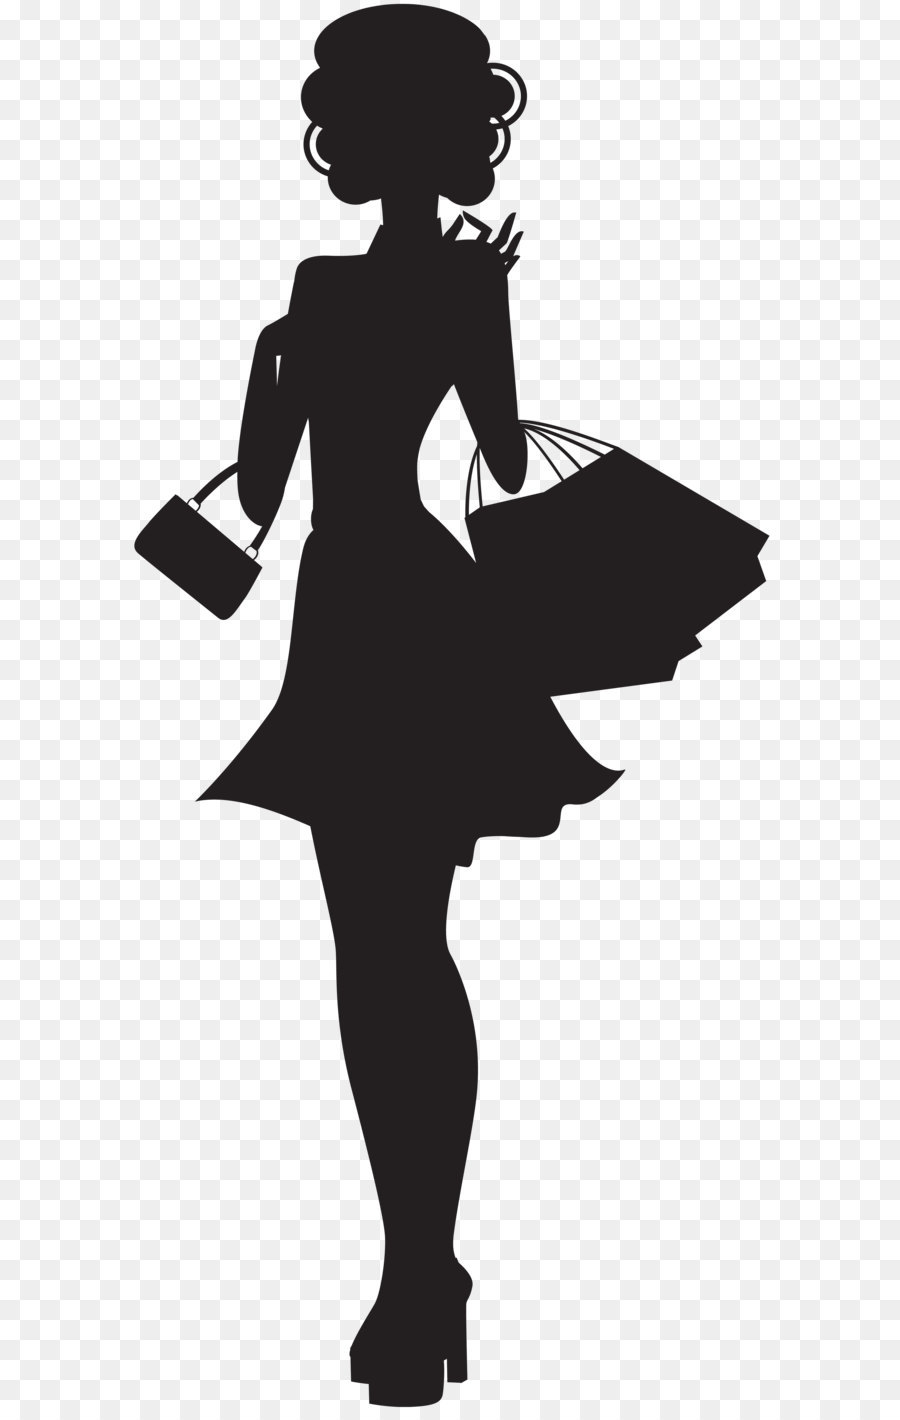 Silhouette Woman Clip art - Shopping Woman Silhouette PNG Clip Art png download - 3681*8000 - Free Transparent Silhouette png Download.